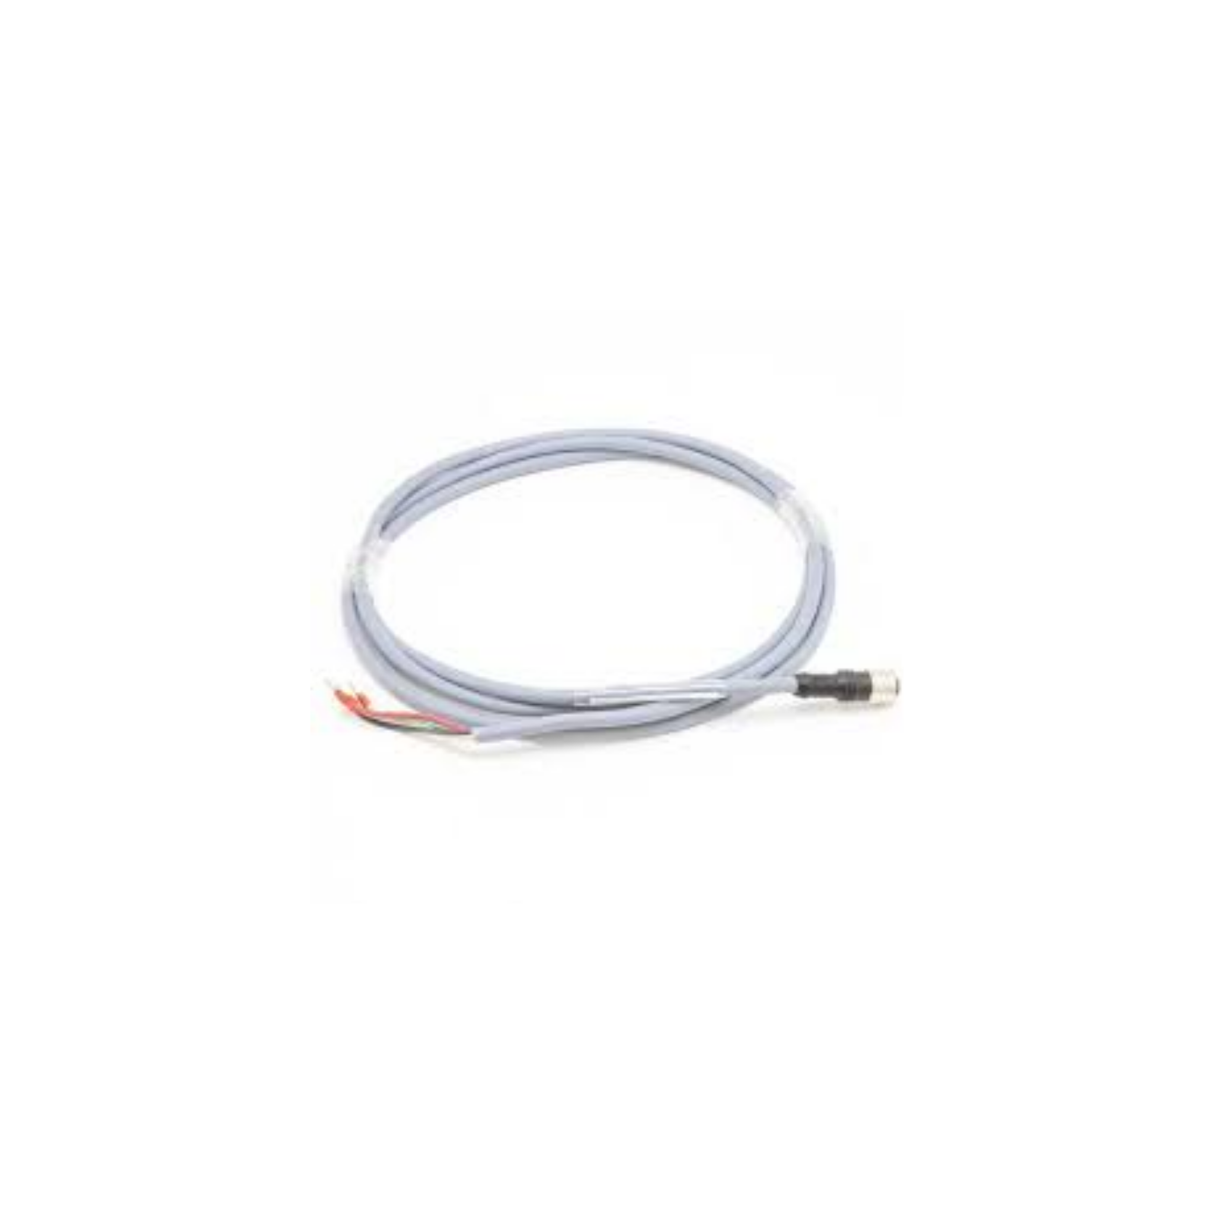 Danfoss 034G2202 Meter Cable Wire